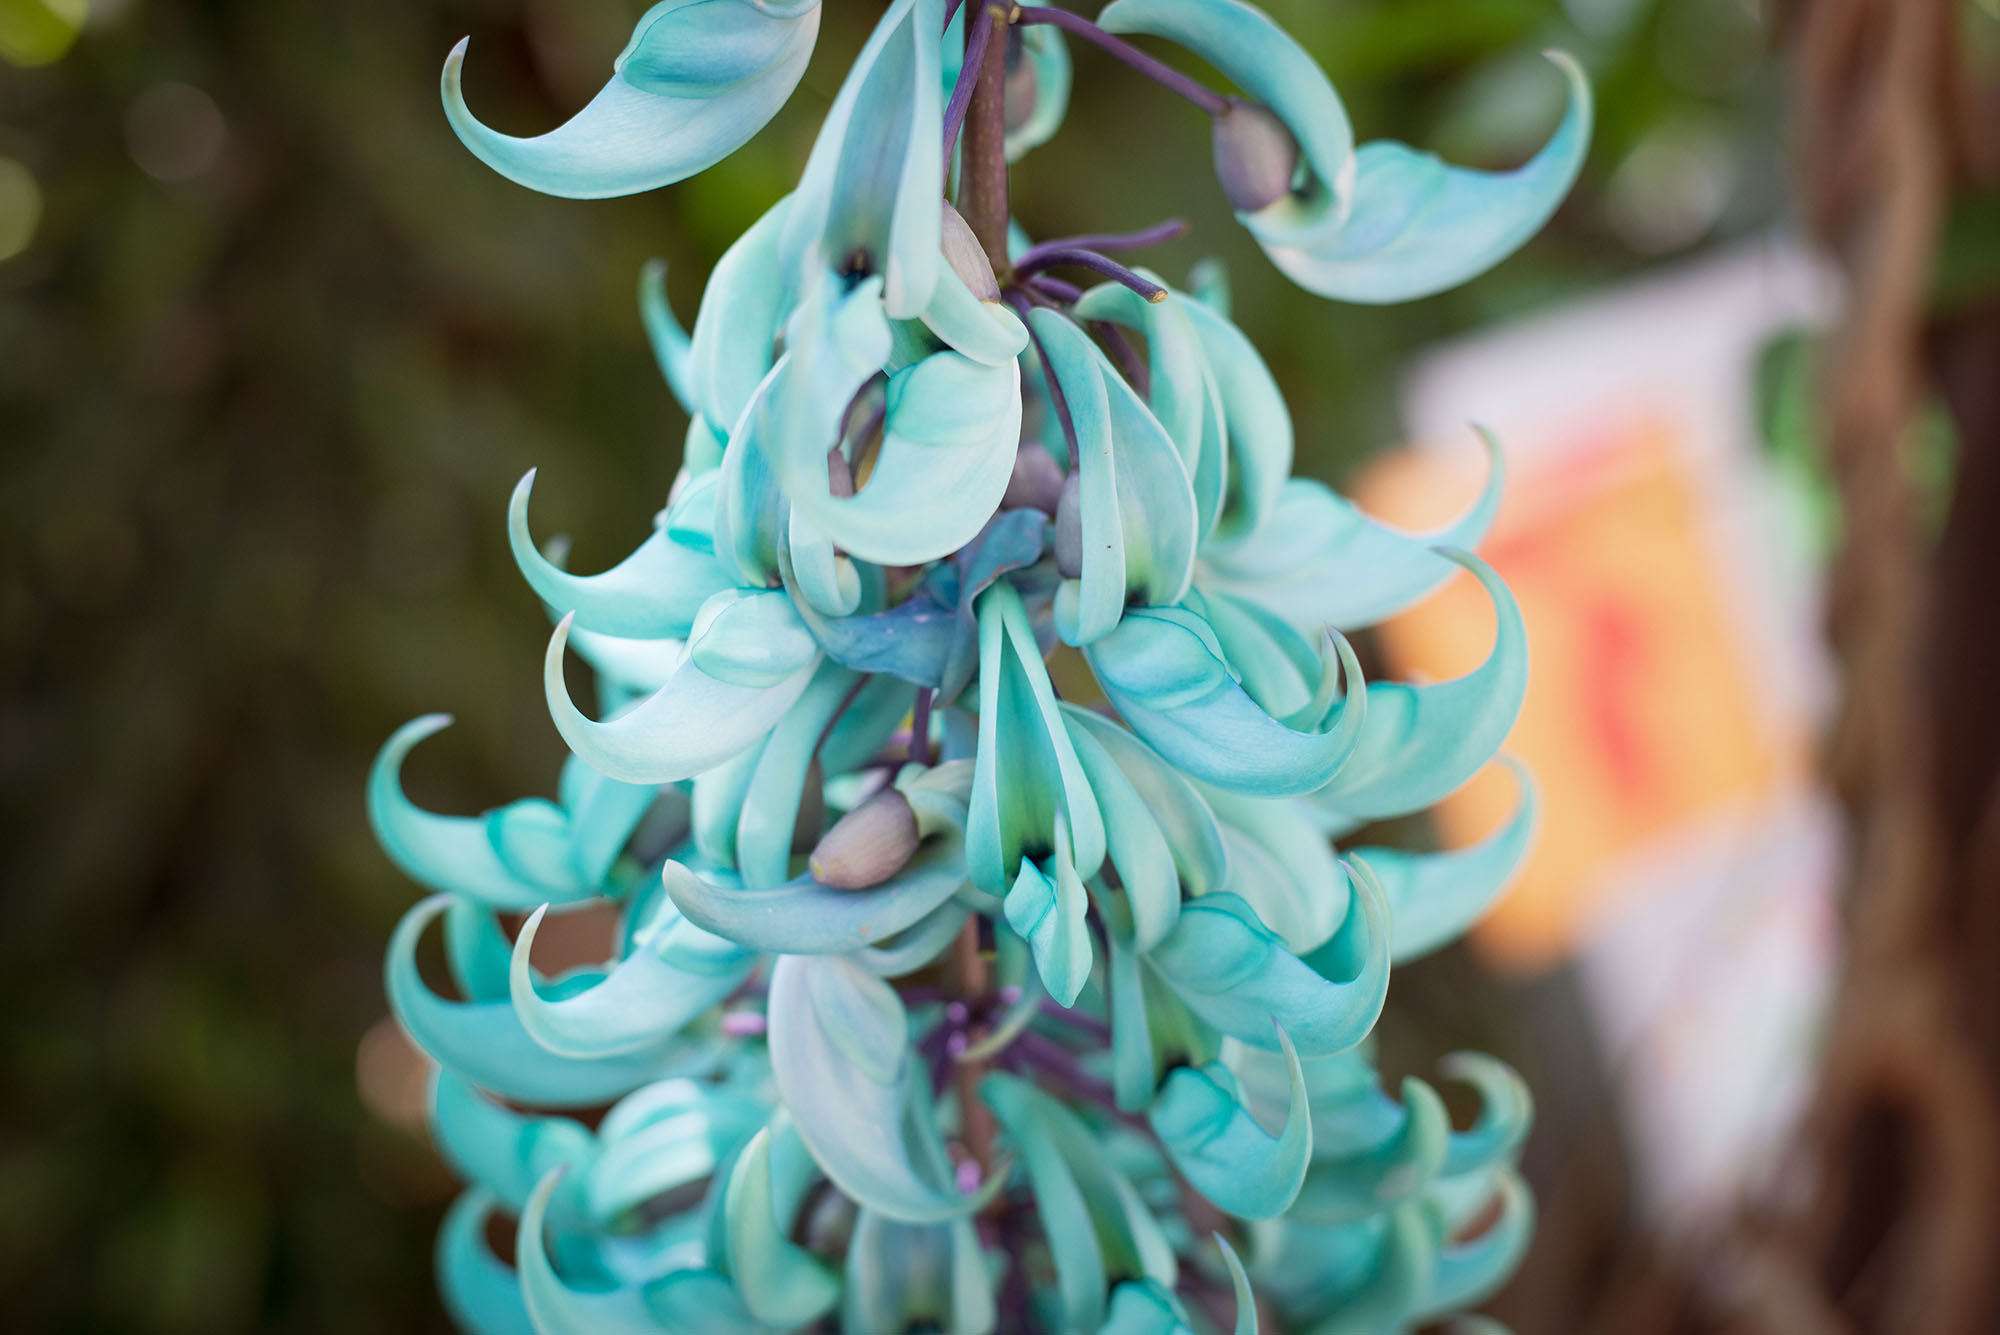 Jade Vine in the Smith Entry Prow at Naples Botanical Garden